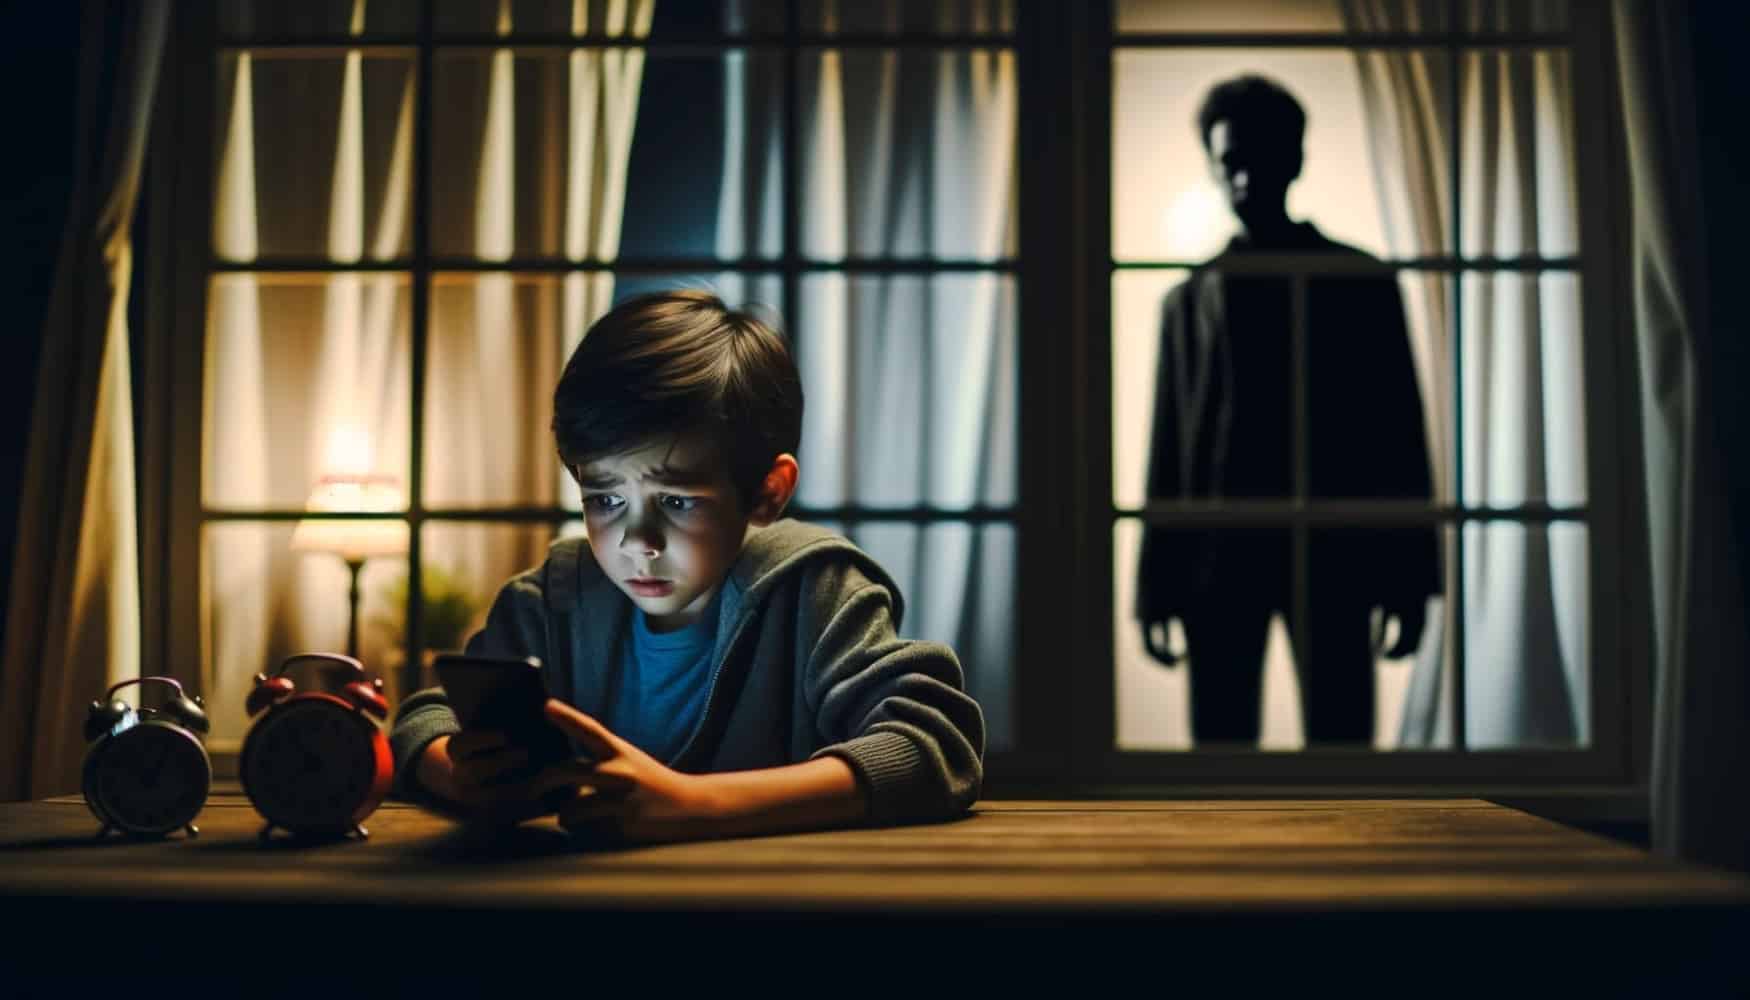 A boy sits at a table in a dark room and looks at a cell phone, on the table stand two watches, behind the back of the boy a large window in which the light is shining and stands a man who looks at the boy, on the window hang curtains and there is a table lamp next to the flower